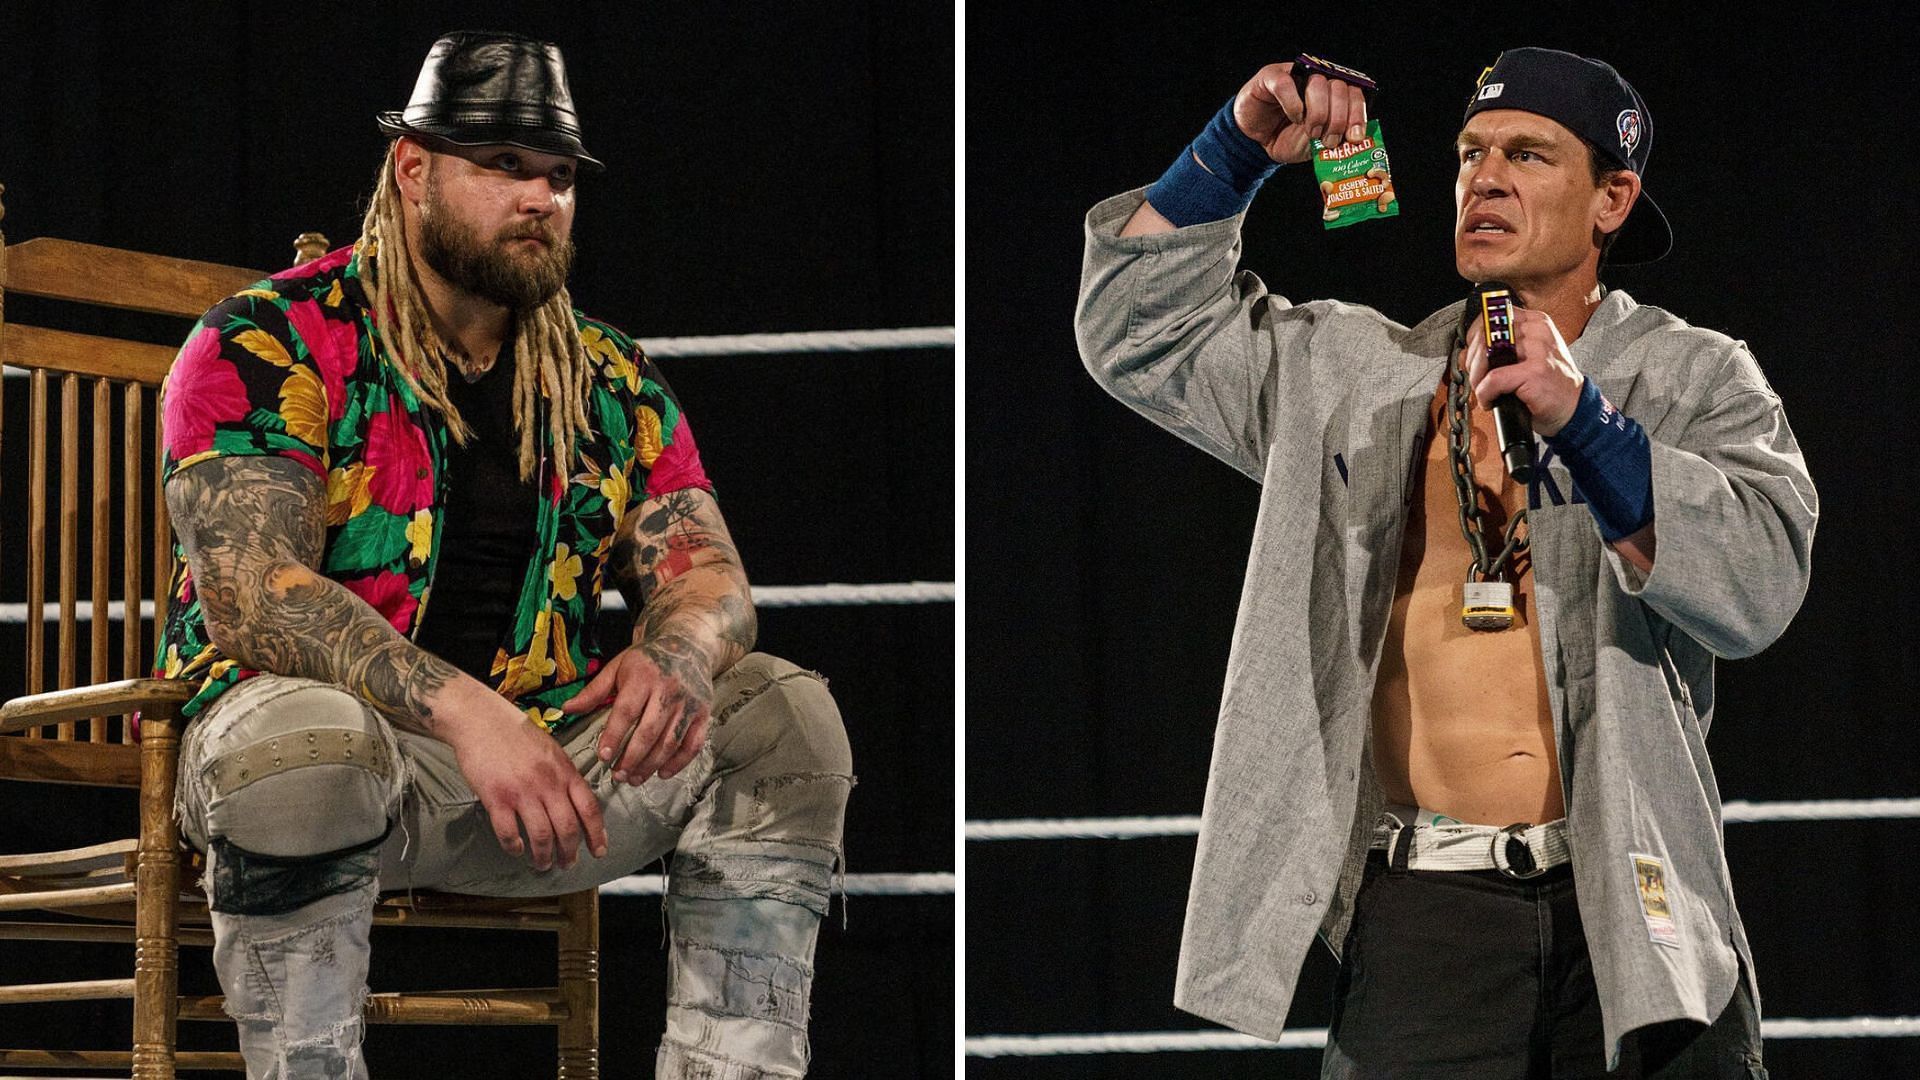 Bray Wyatt had some incredible matches with John Cena